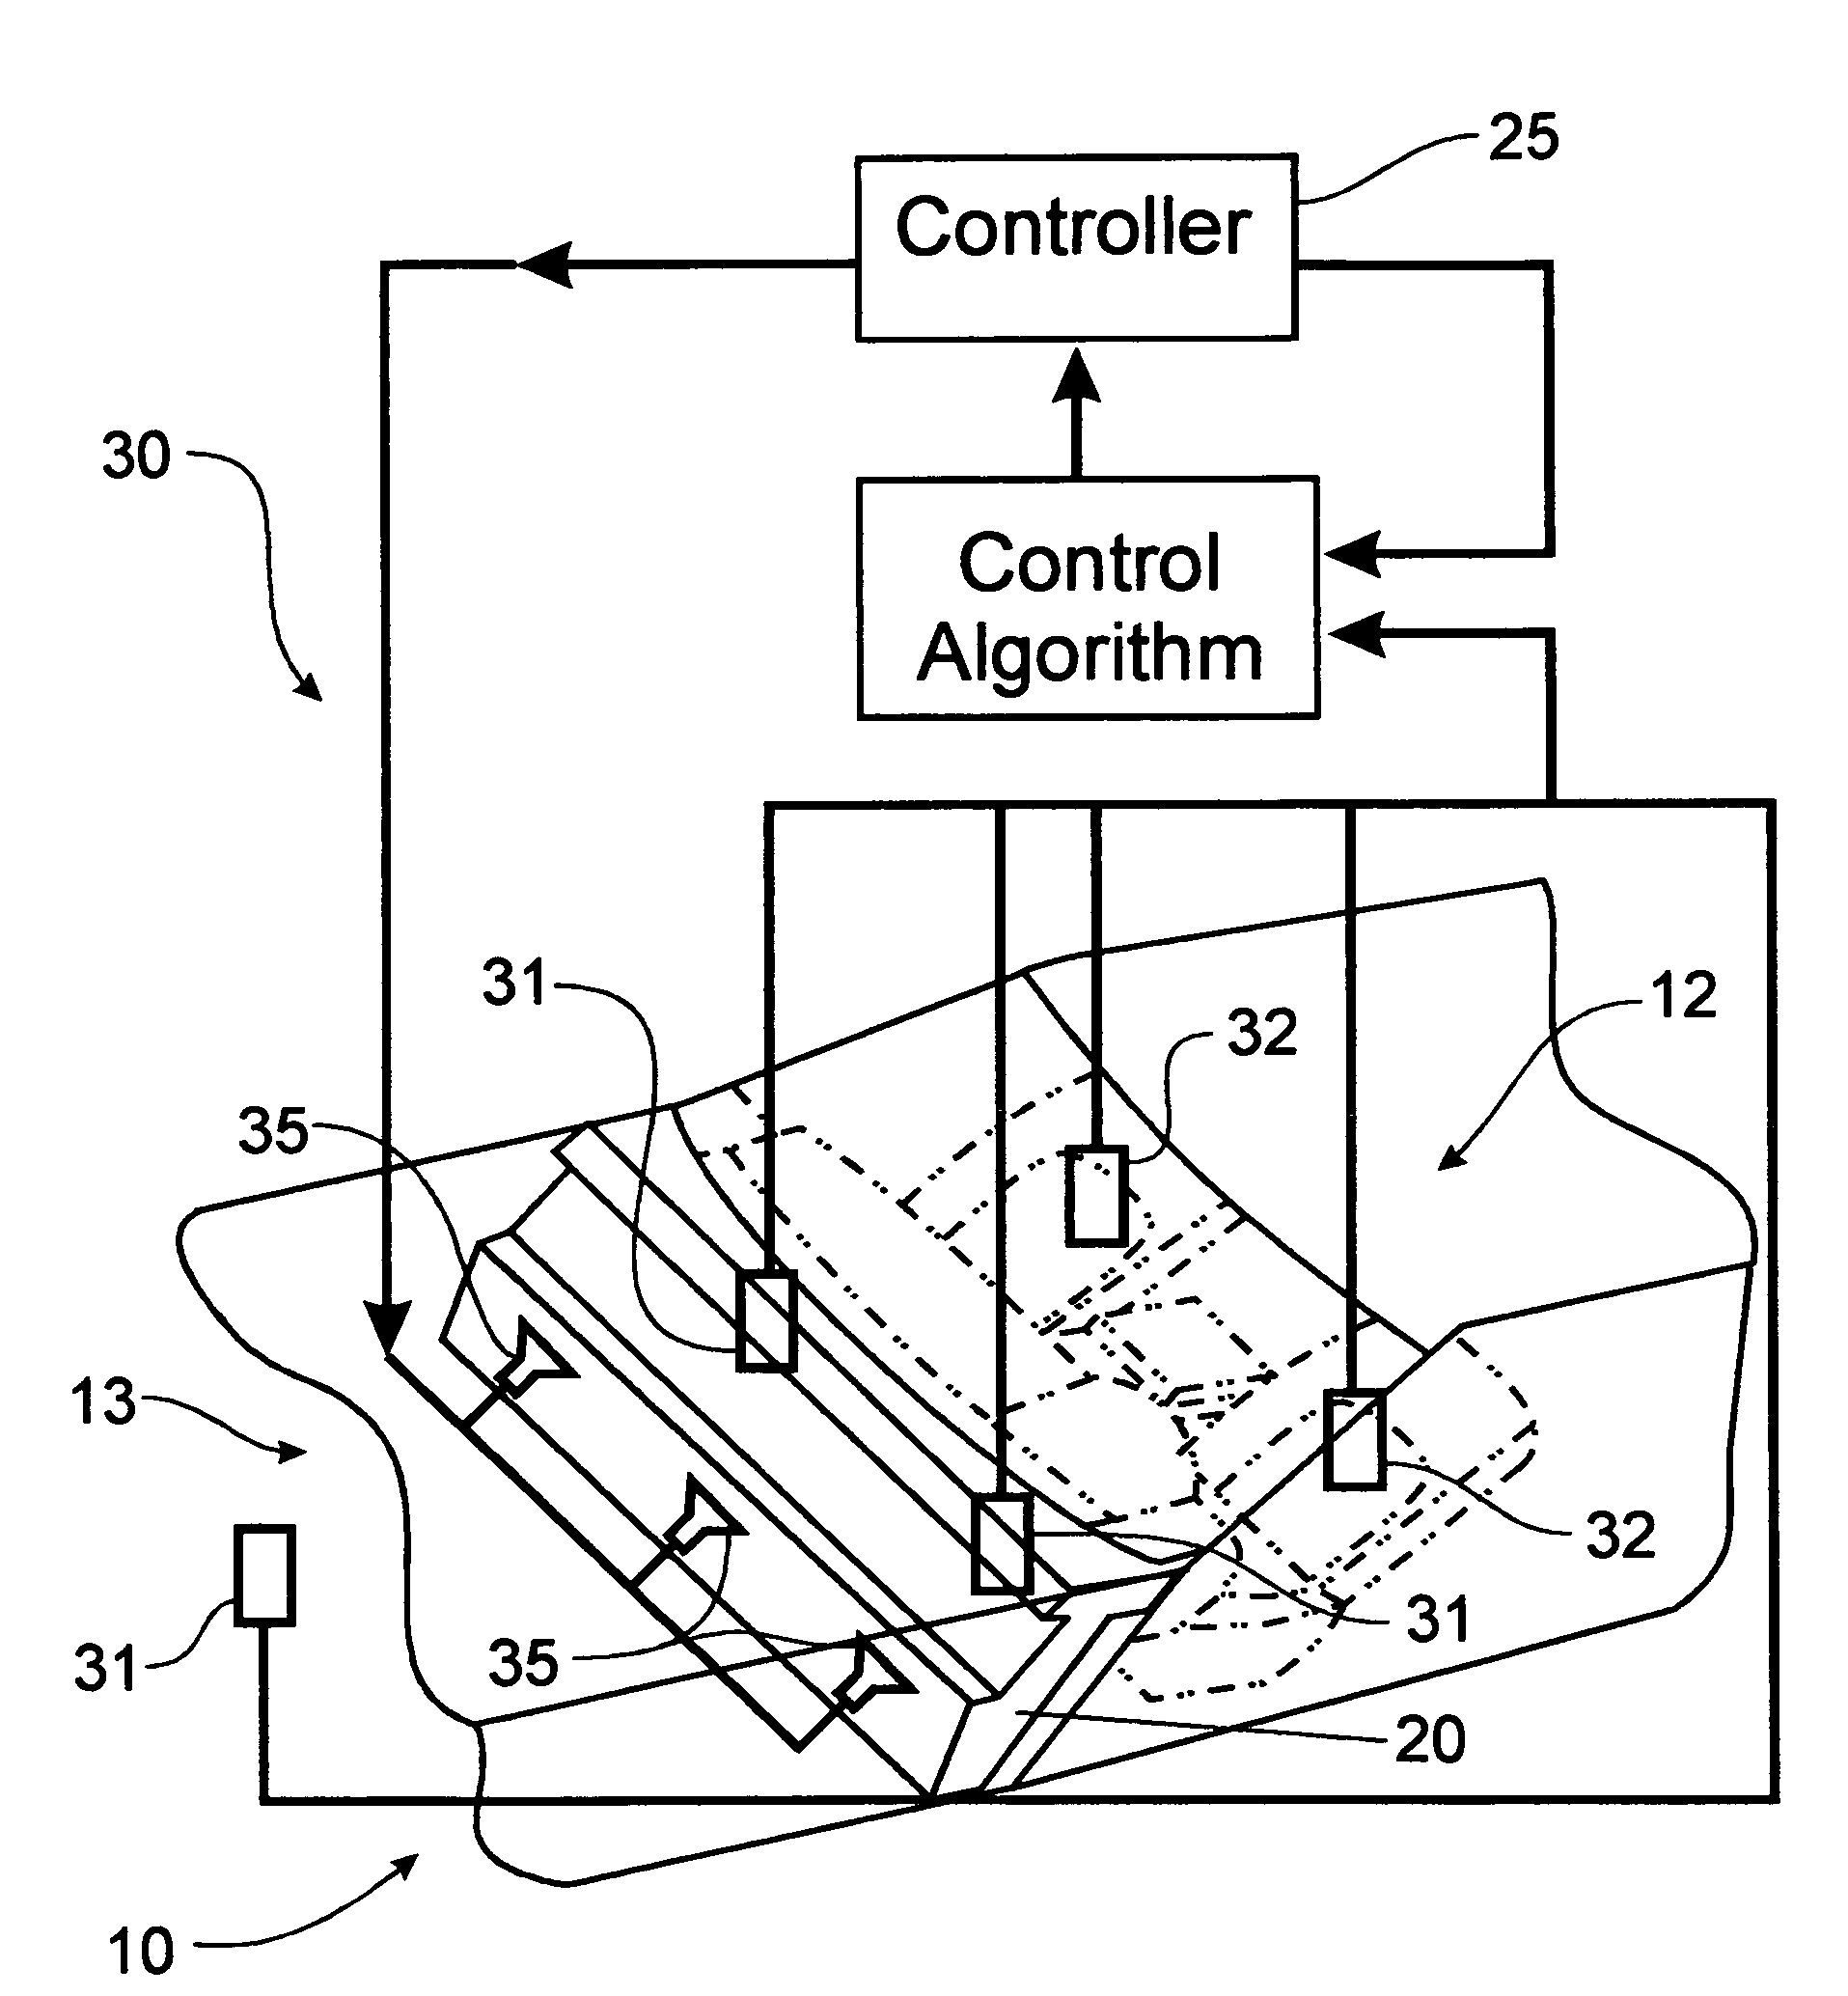 Indirect acoustic transfer control of noise